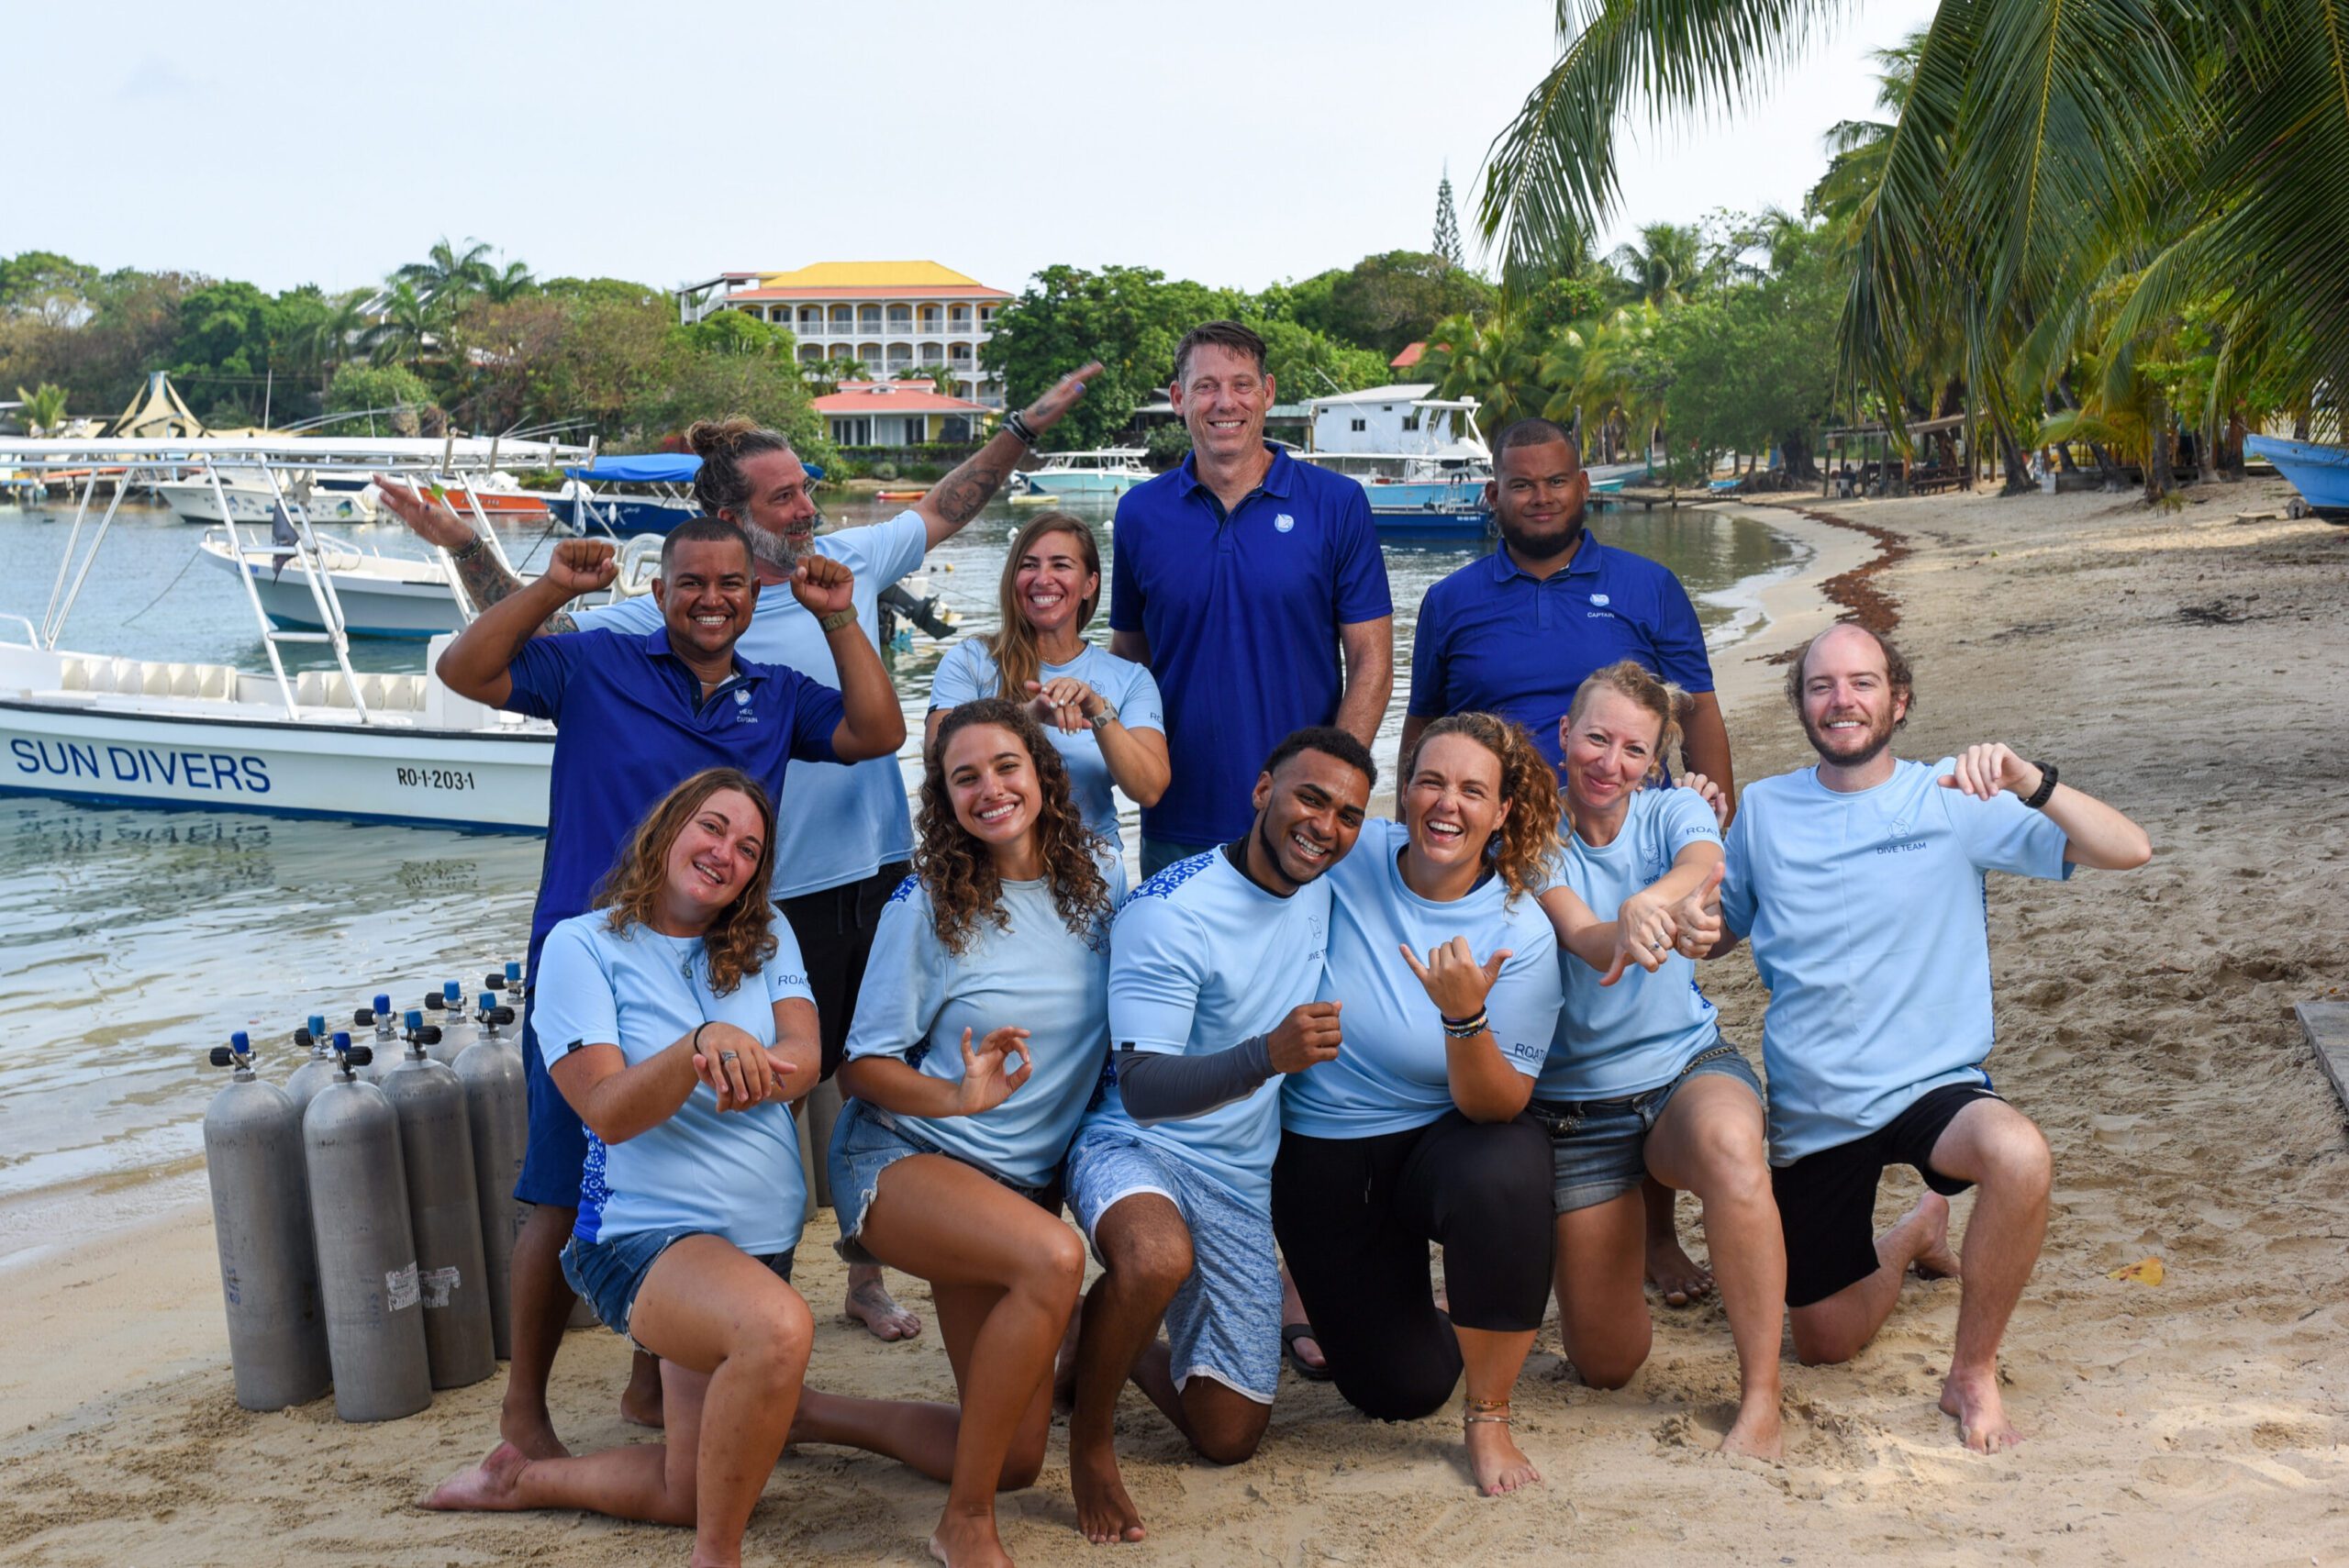 The team of the dive shop Sun Divers Roatan is wearing their team shirts and standing at the beach in front of the diver centers boats in Roatan, Honduras.